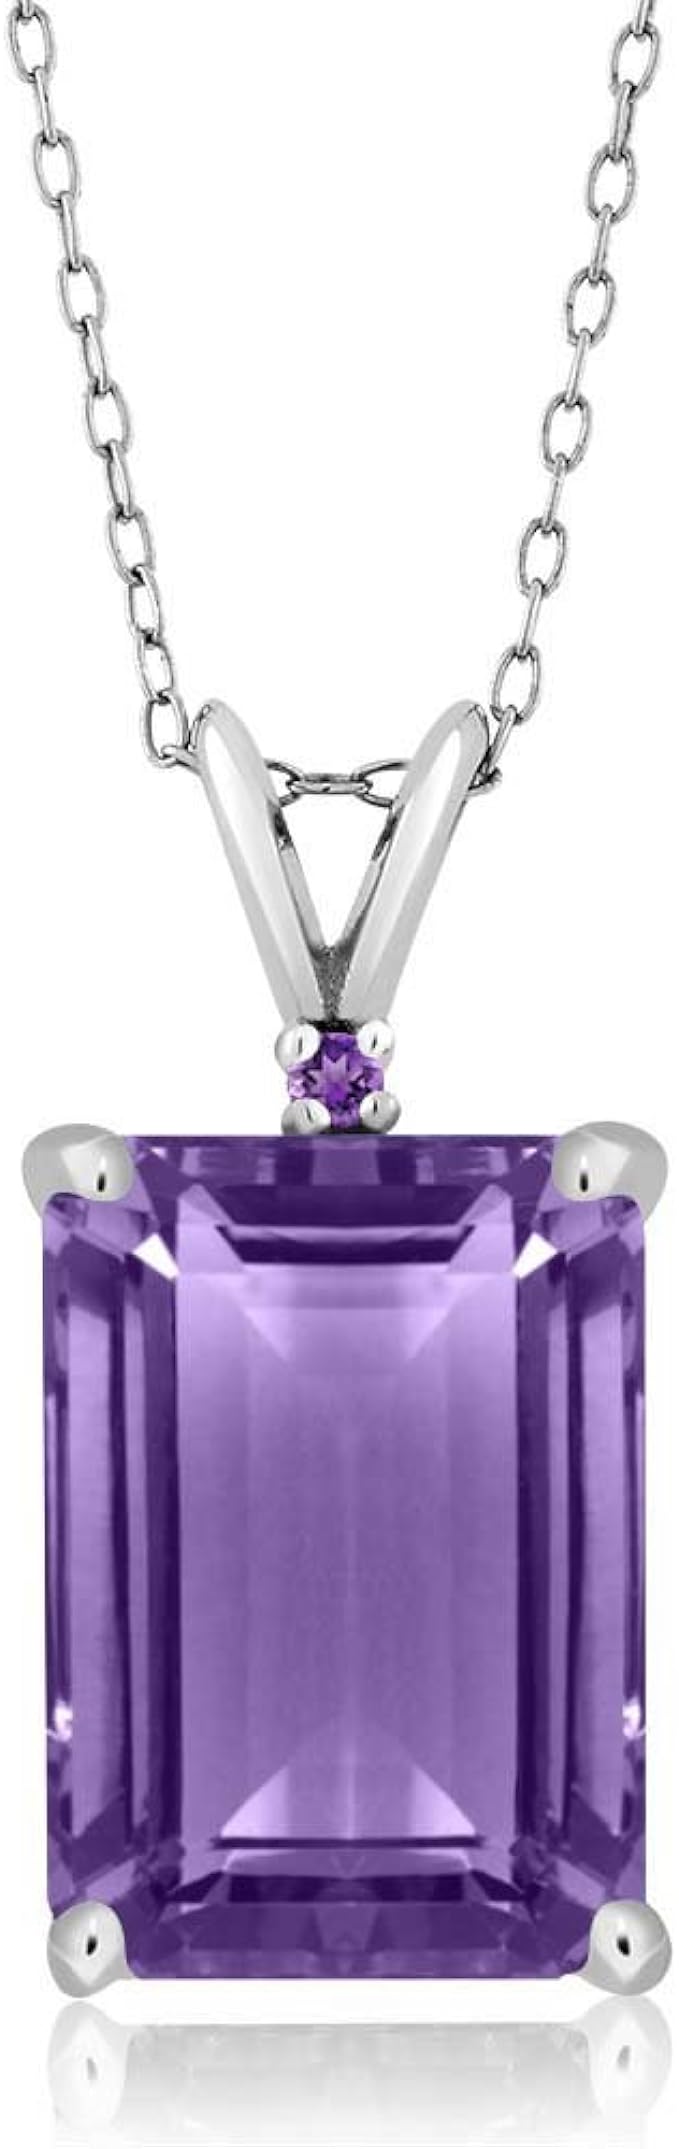 Gem Stone King 925 Sterling Silver Purple Amethyst Pendant Necklace For Women (7.12 Cttw, Emerald Cut 14X10MM, Gemstone Birthstone with 18 Inch Silver Chain)